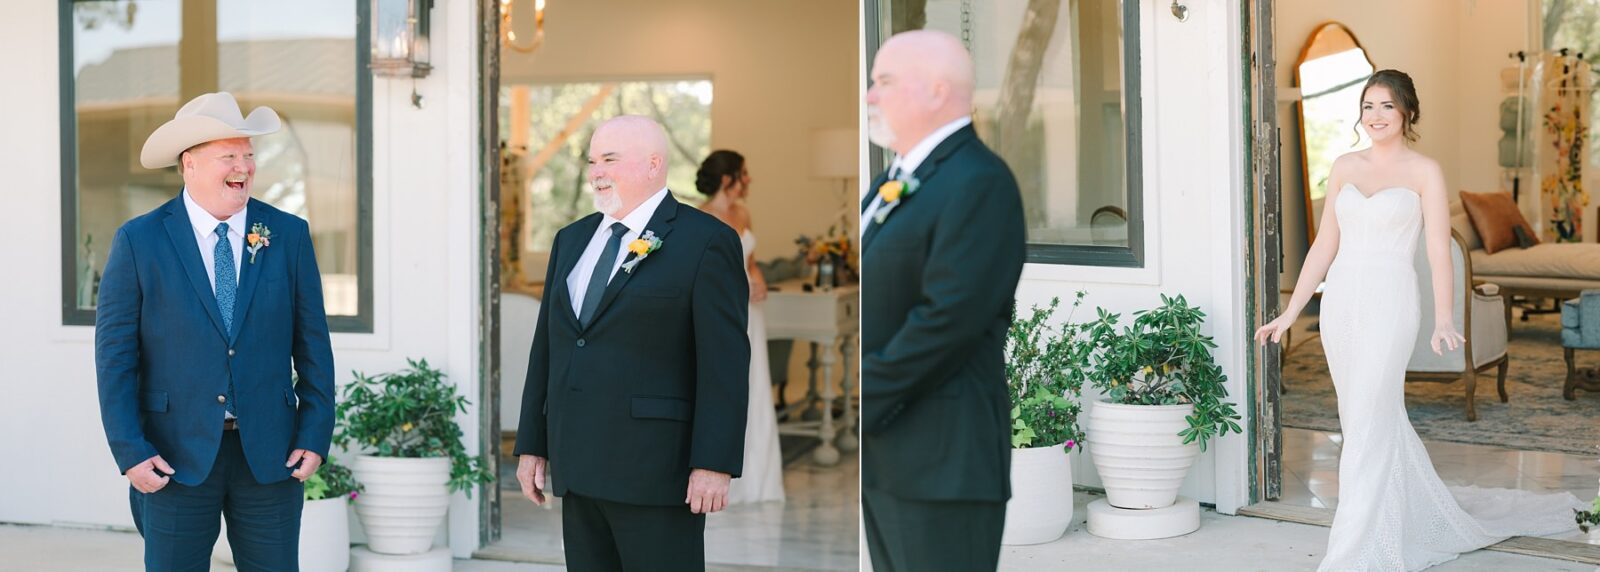 first look with father and step father, blended family wedding, father and step father first look, wedding at the videre estate venue, wimberley, photos by Tara Lyons Photography, Perry's Petal, planning by sweet magnolia events